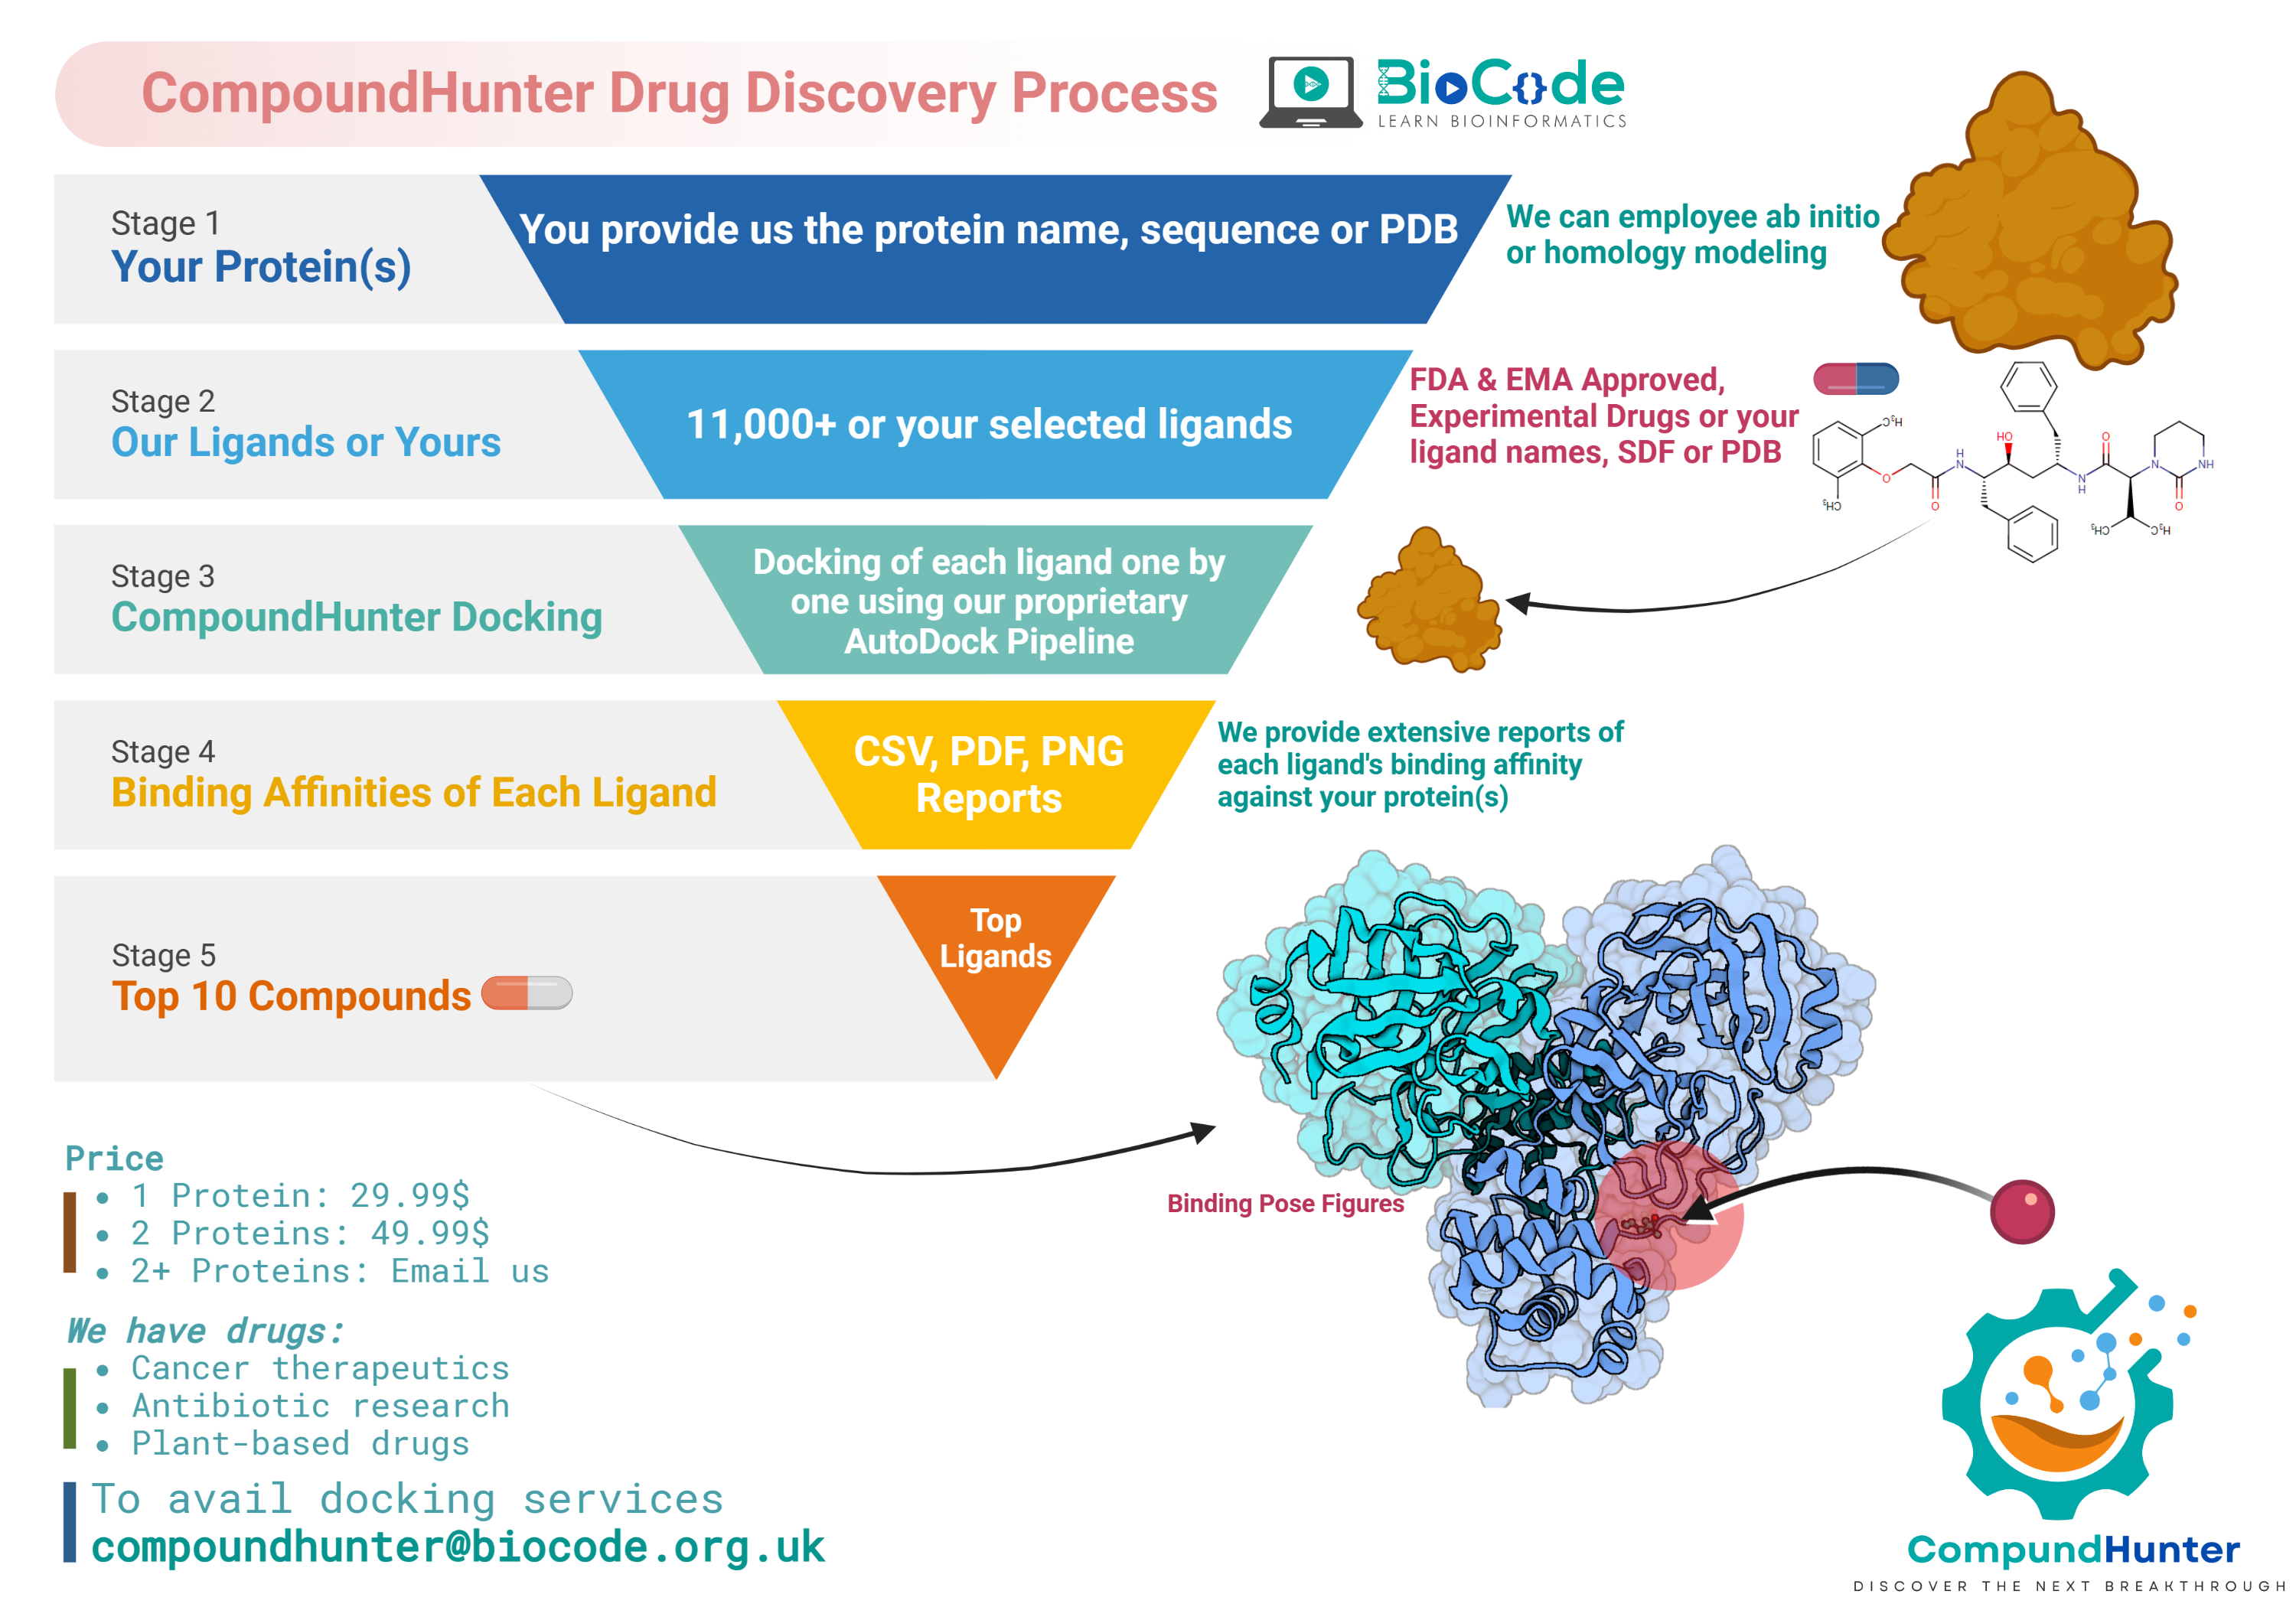 Introducing CompoundHunter: Revolutionize Your Research 🚀 Discover the future of protein-ligand docking with BioCode's cutting-edge service! 🧬 Identify top lead compounds for your research hypothesis in record time – no more hours of tedious work! 🕒 🧬 Dock your protein(s) against 11,000+ pre-existing or custom ligands within 24 hours! 🚀 Perfect for oncoproteins, antibiotic-resistant proteins, and any disease research! 📈 Highly accurate results backed by advanced AutoDock Vina technology! 📊 Get detailed PDF reports and PNG figures of top 10 lead compounds! 🔍 Save time, resources, and accelerate your research progress! 💡 Trust our expertise and try CompoundHunter today! #CompoundHunter #ProteinDocking #ResearchInnovation #BioCode